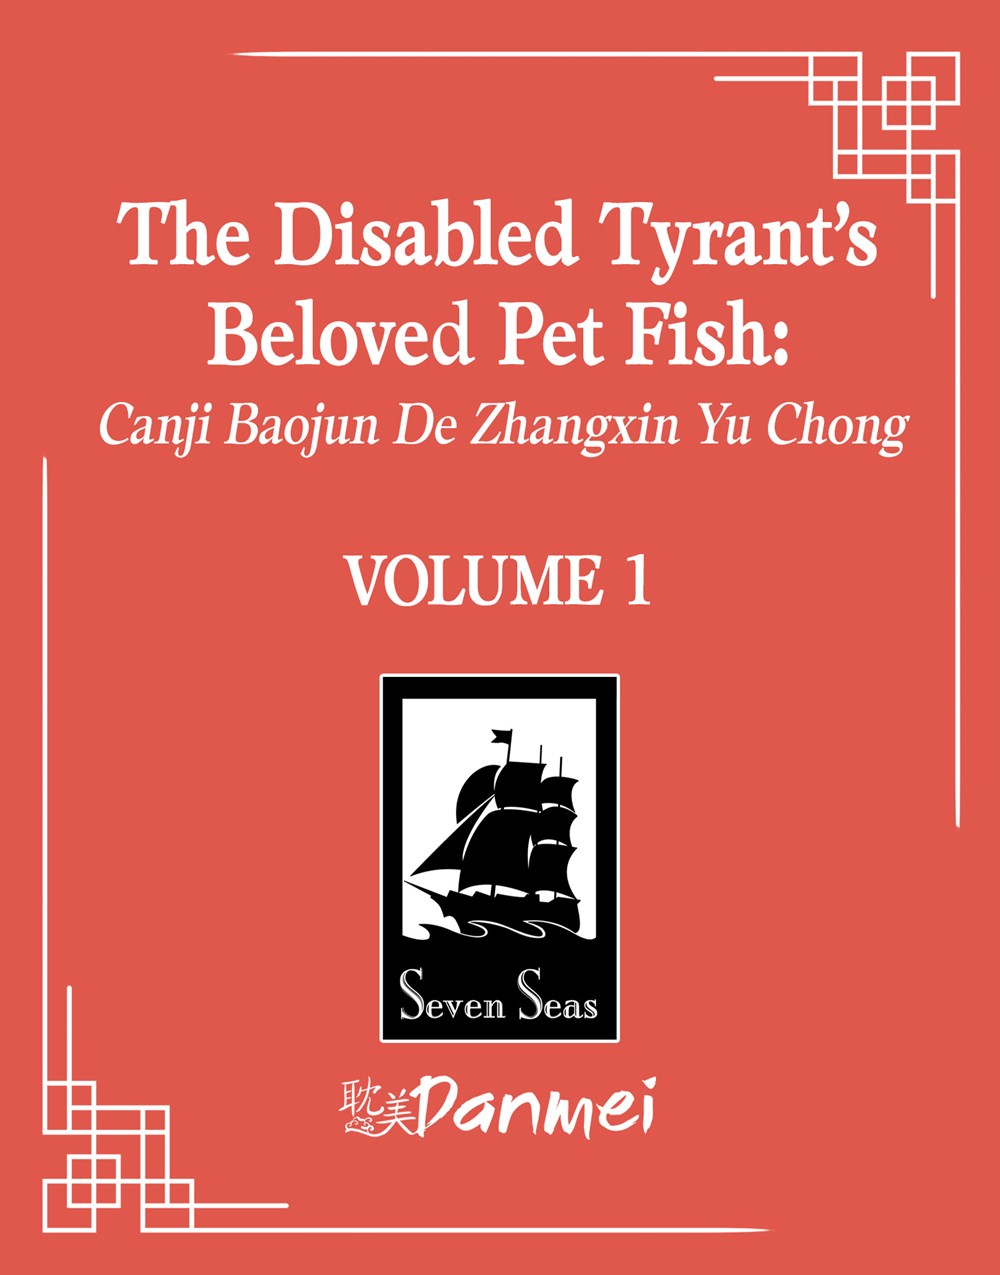 The Disabled Tyrant's Beloved Pet Fish Novel Volume 1 image count 0